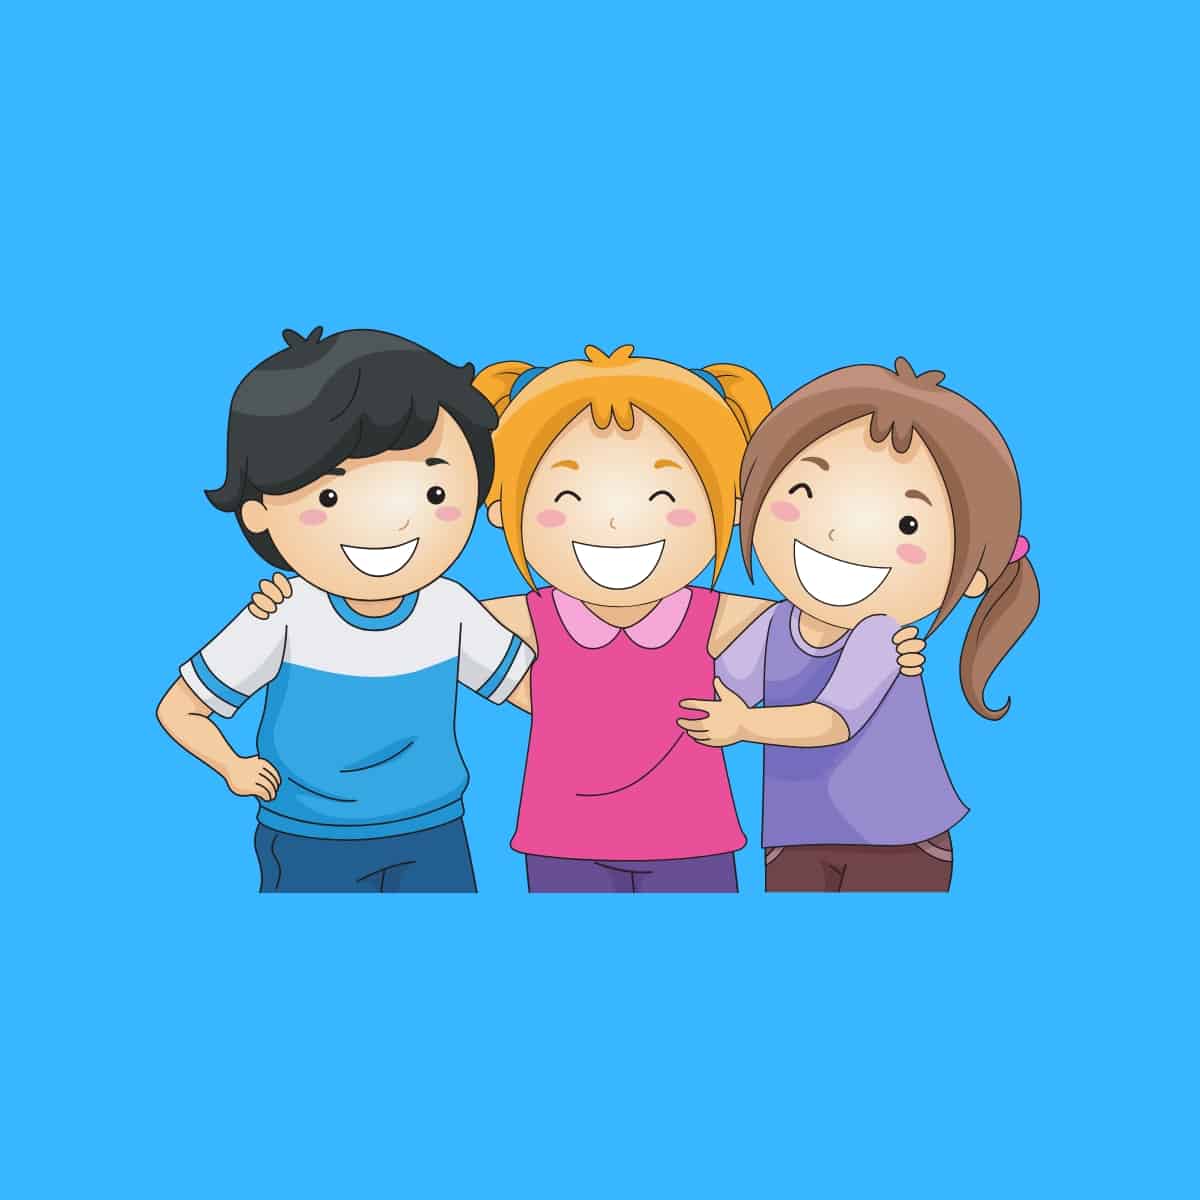 Cartoon graphic of 3 friends with their arms around each other smiling on a blue background.